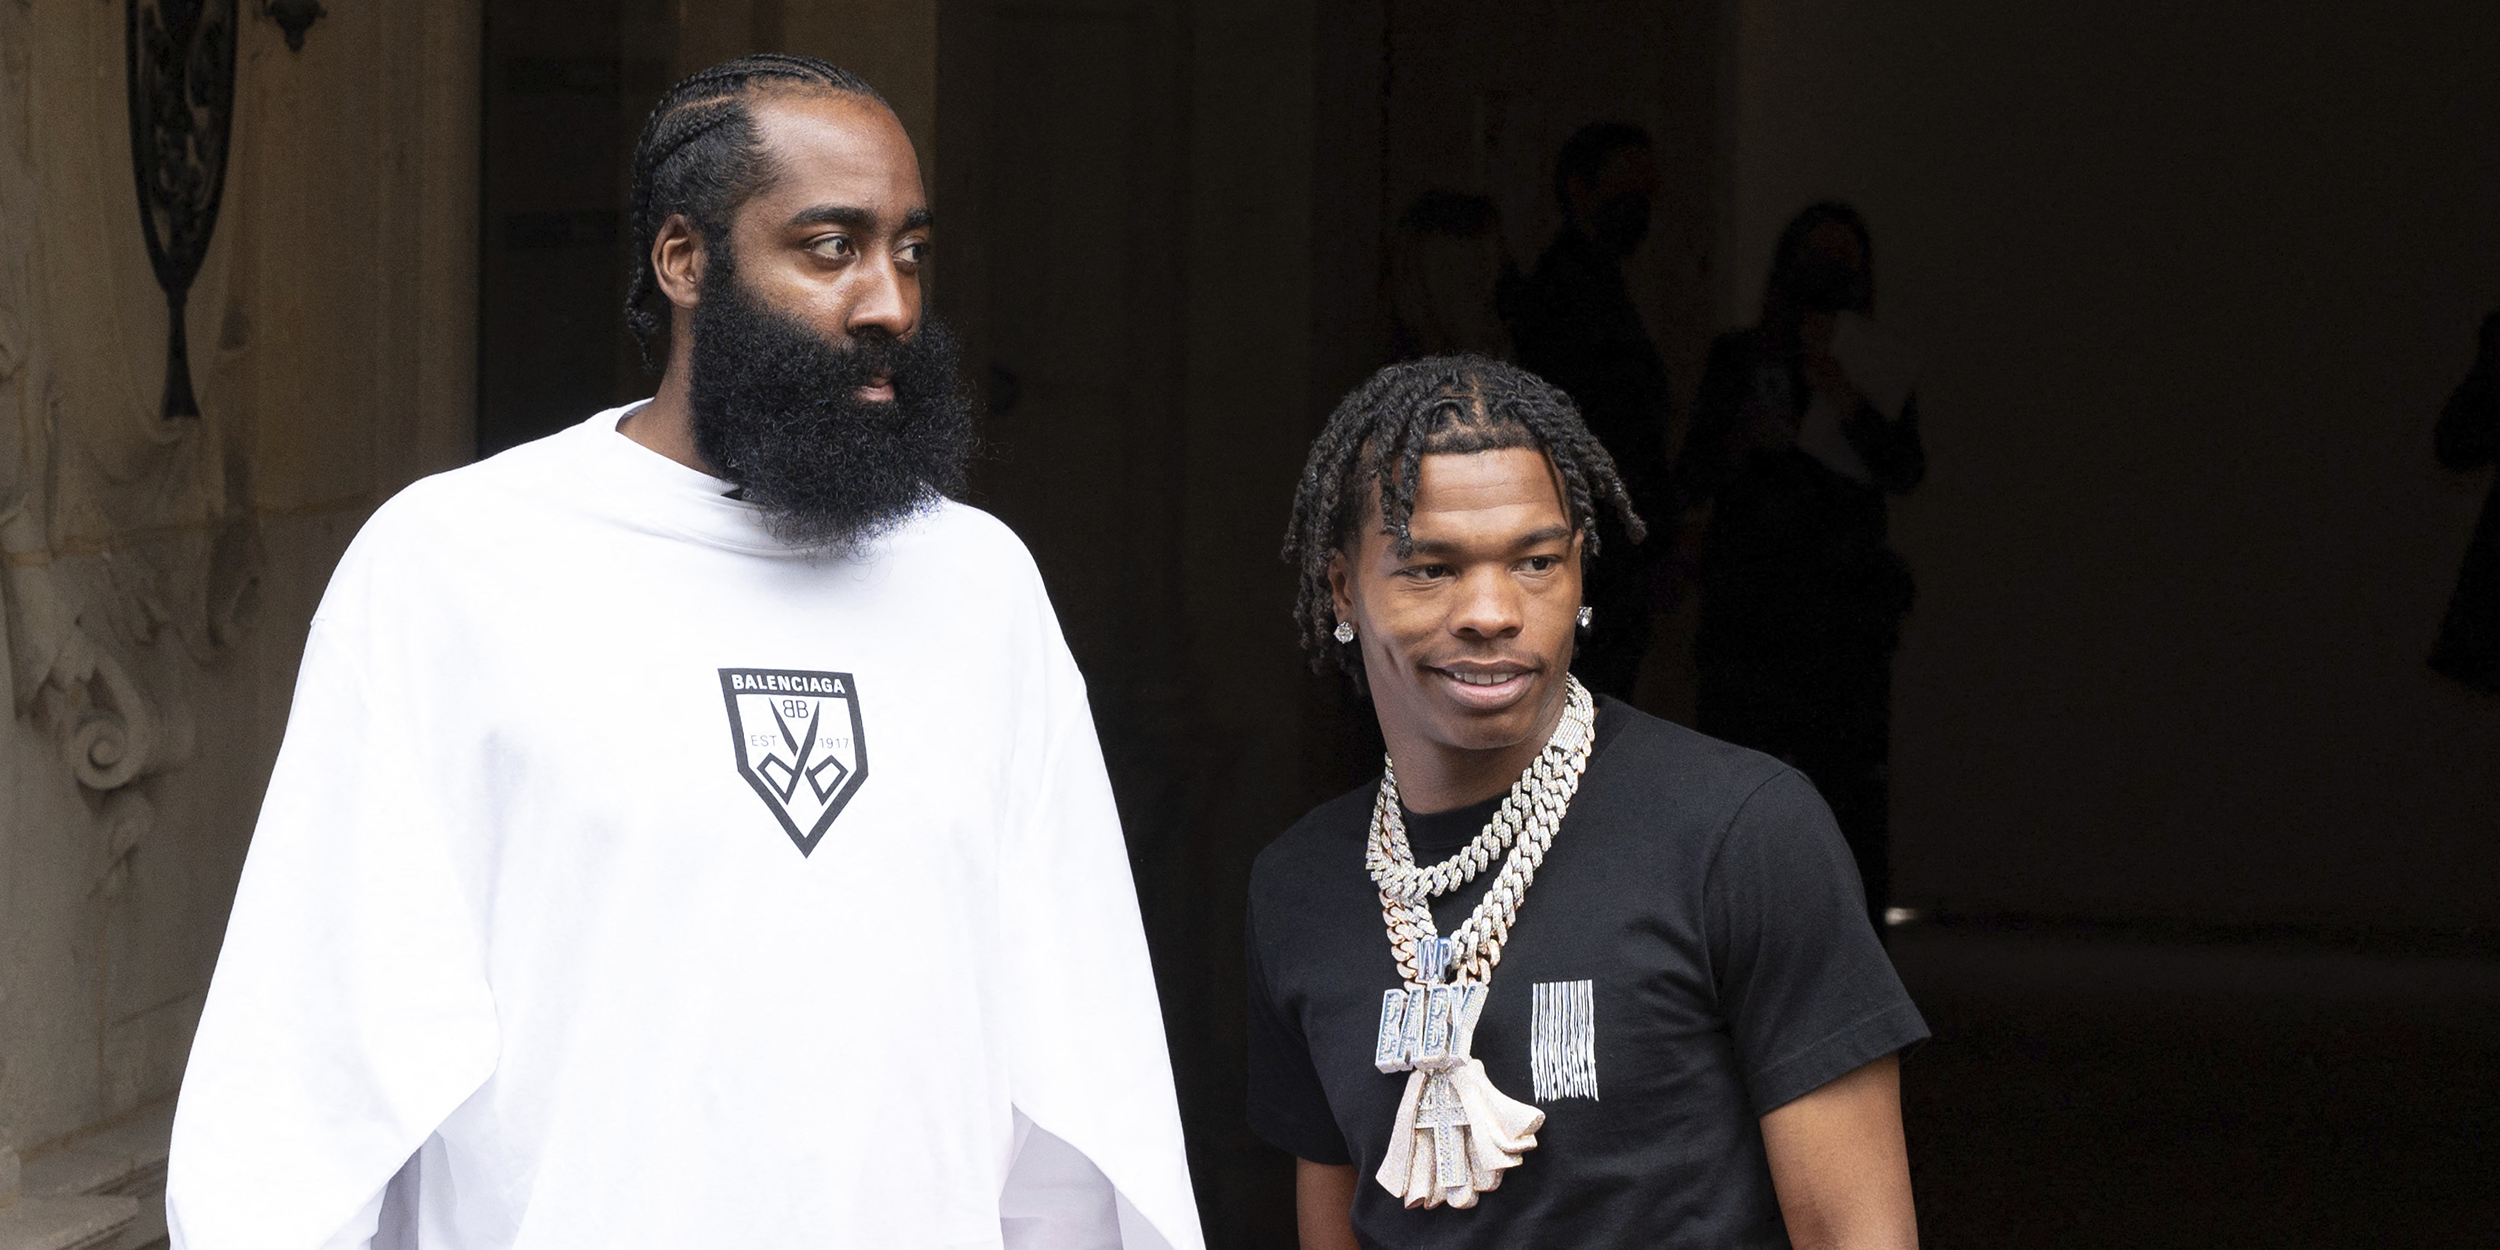 Rapper Lil Baby taken into custody on drug charge in Paris with James Harden